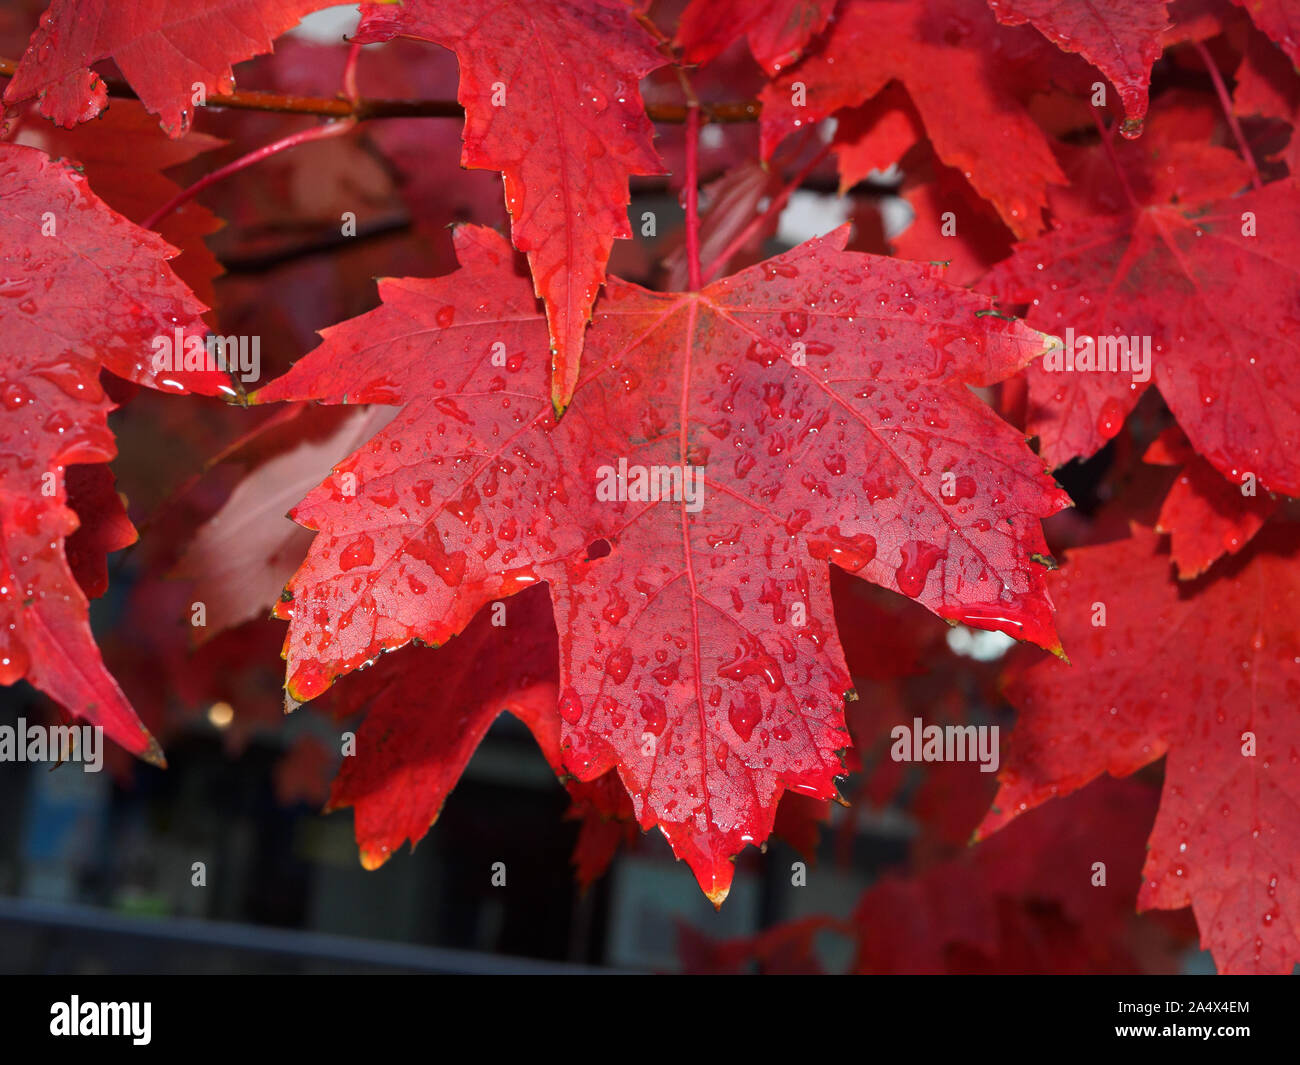 Perfect upside down red maple leaf, drops of water on it from the rain. Stock Photo